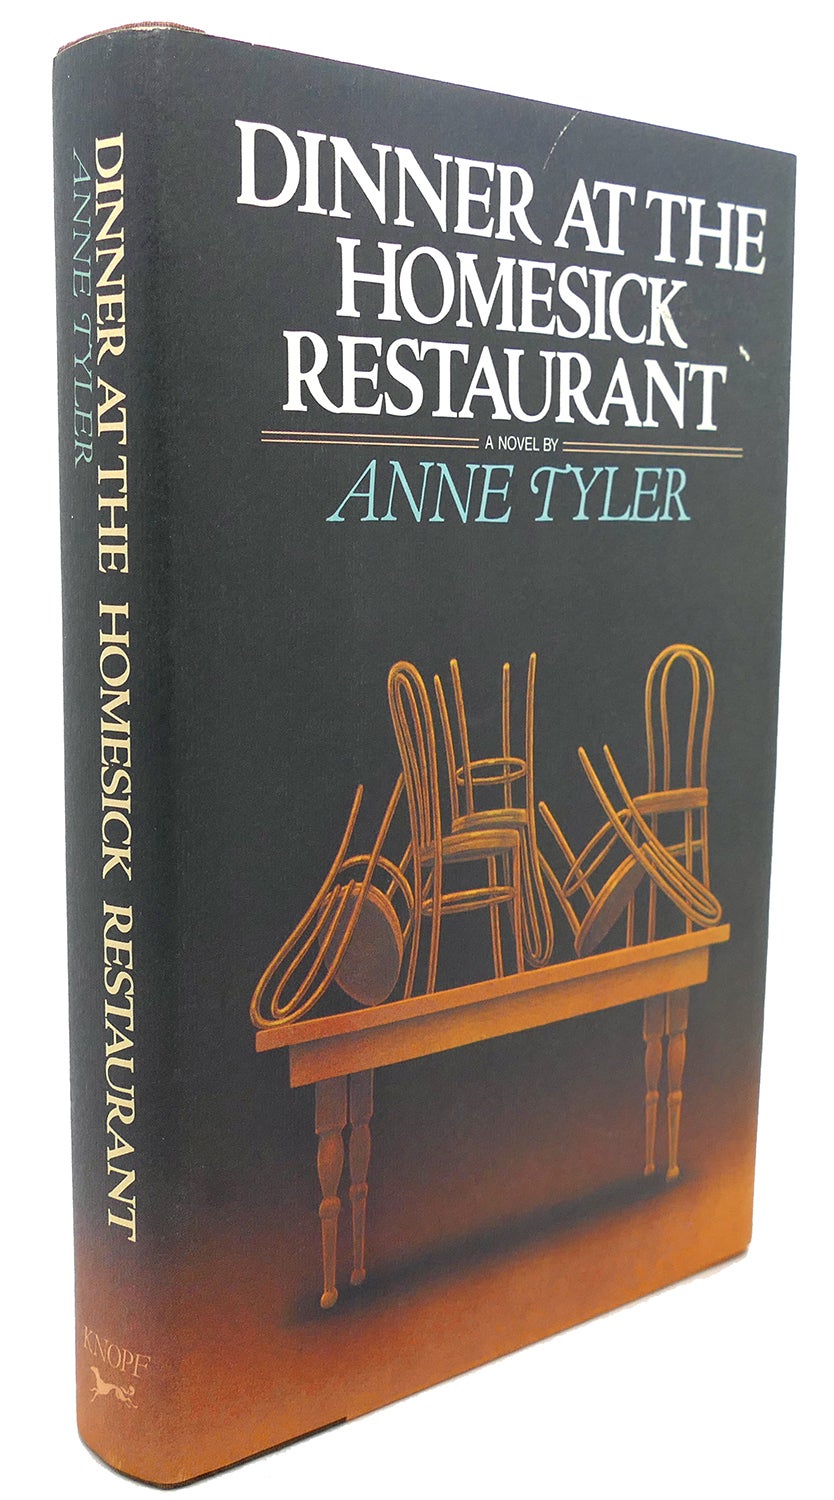 Edition;　DINNER　Anne　Tyler　First　First　AT　THE　RESTAURANT　HOMESICK　Printing